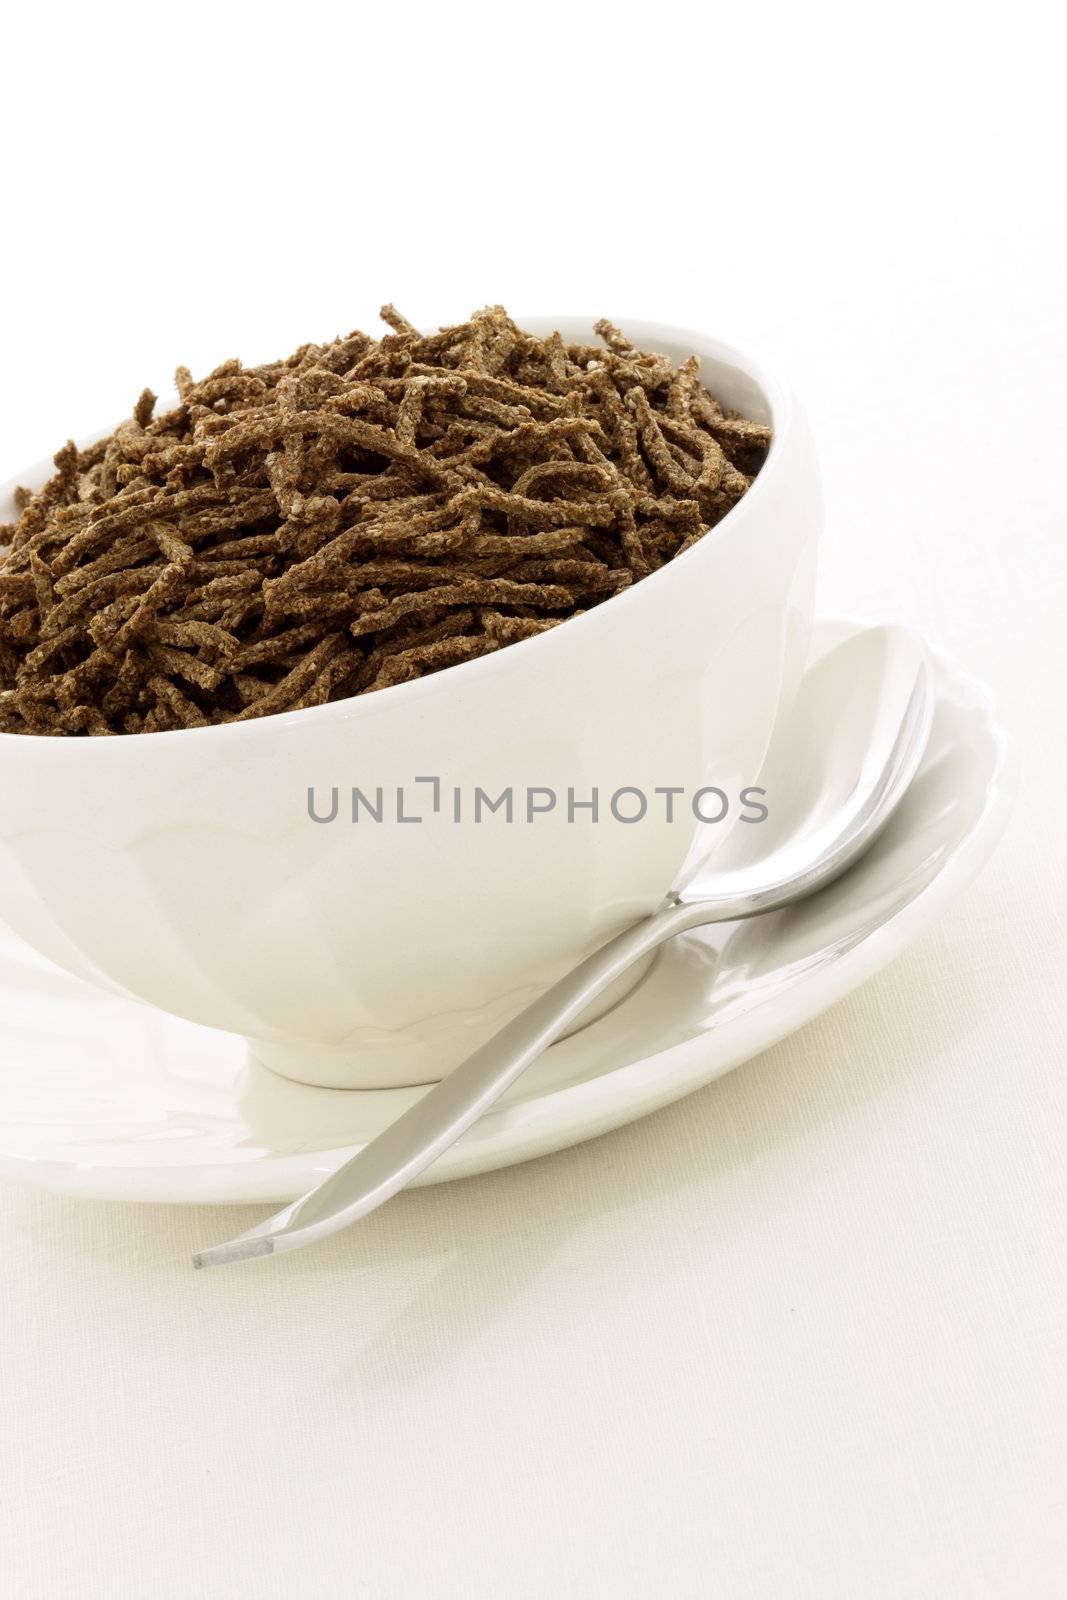 Delicious and nutritious cereal, high in bran, high in fiber, served in a beautiful  French Cafe au Lait Bowl with wide rims. In place of handles. This healthy bran cereal will be an aid to digestive health. 